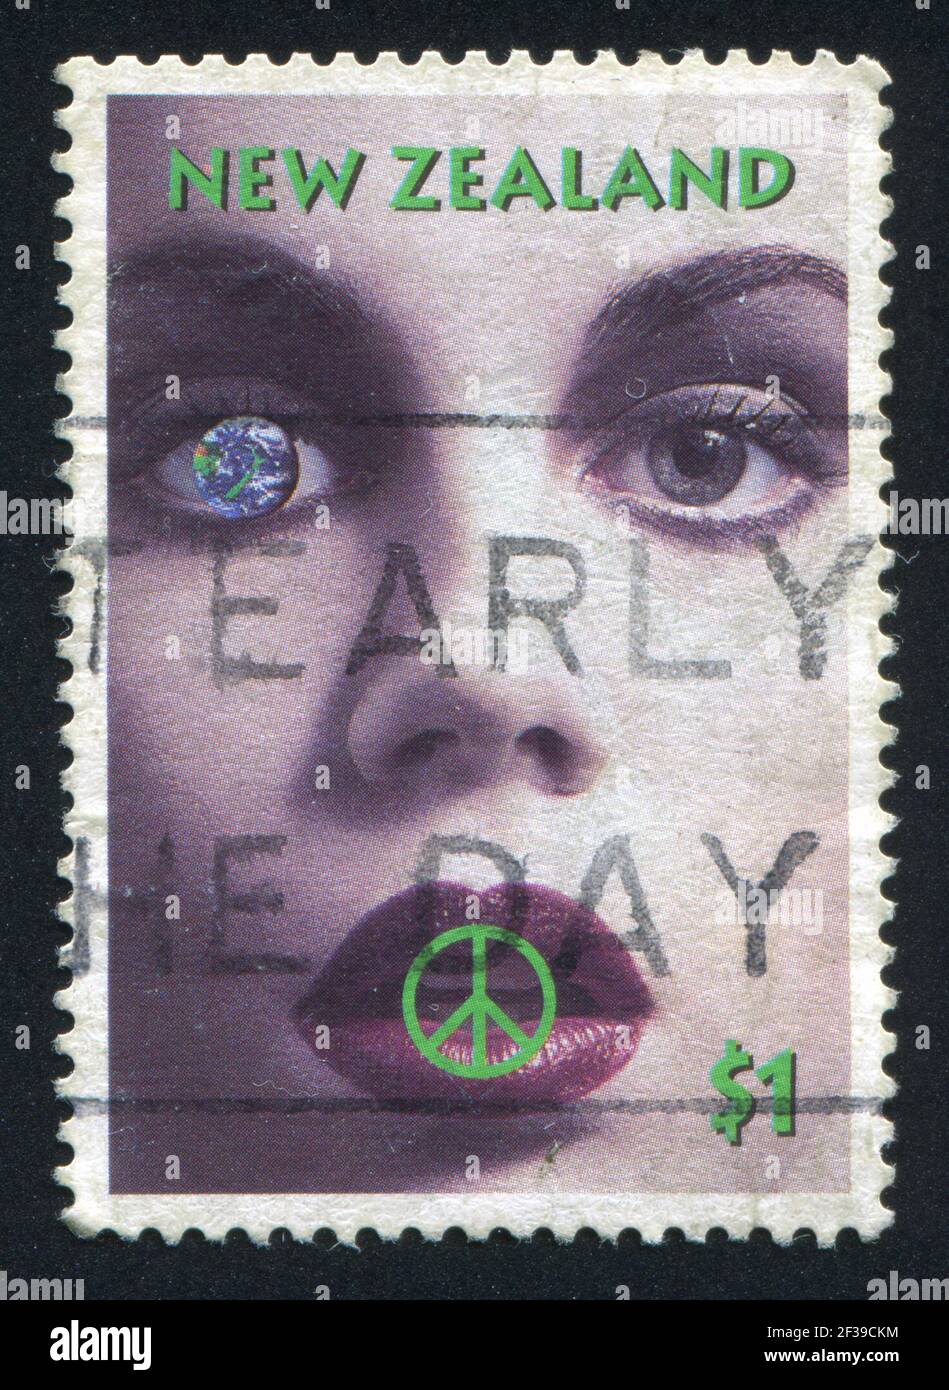 NEW ZEALAND - CIRCA 1995: stamp printed by New Zealand, shows Woman Face, Campaign for Nuclear Disarmament Symbol and Planet Earth, circa 1995 Stock Photo